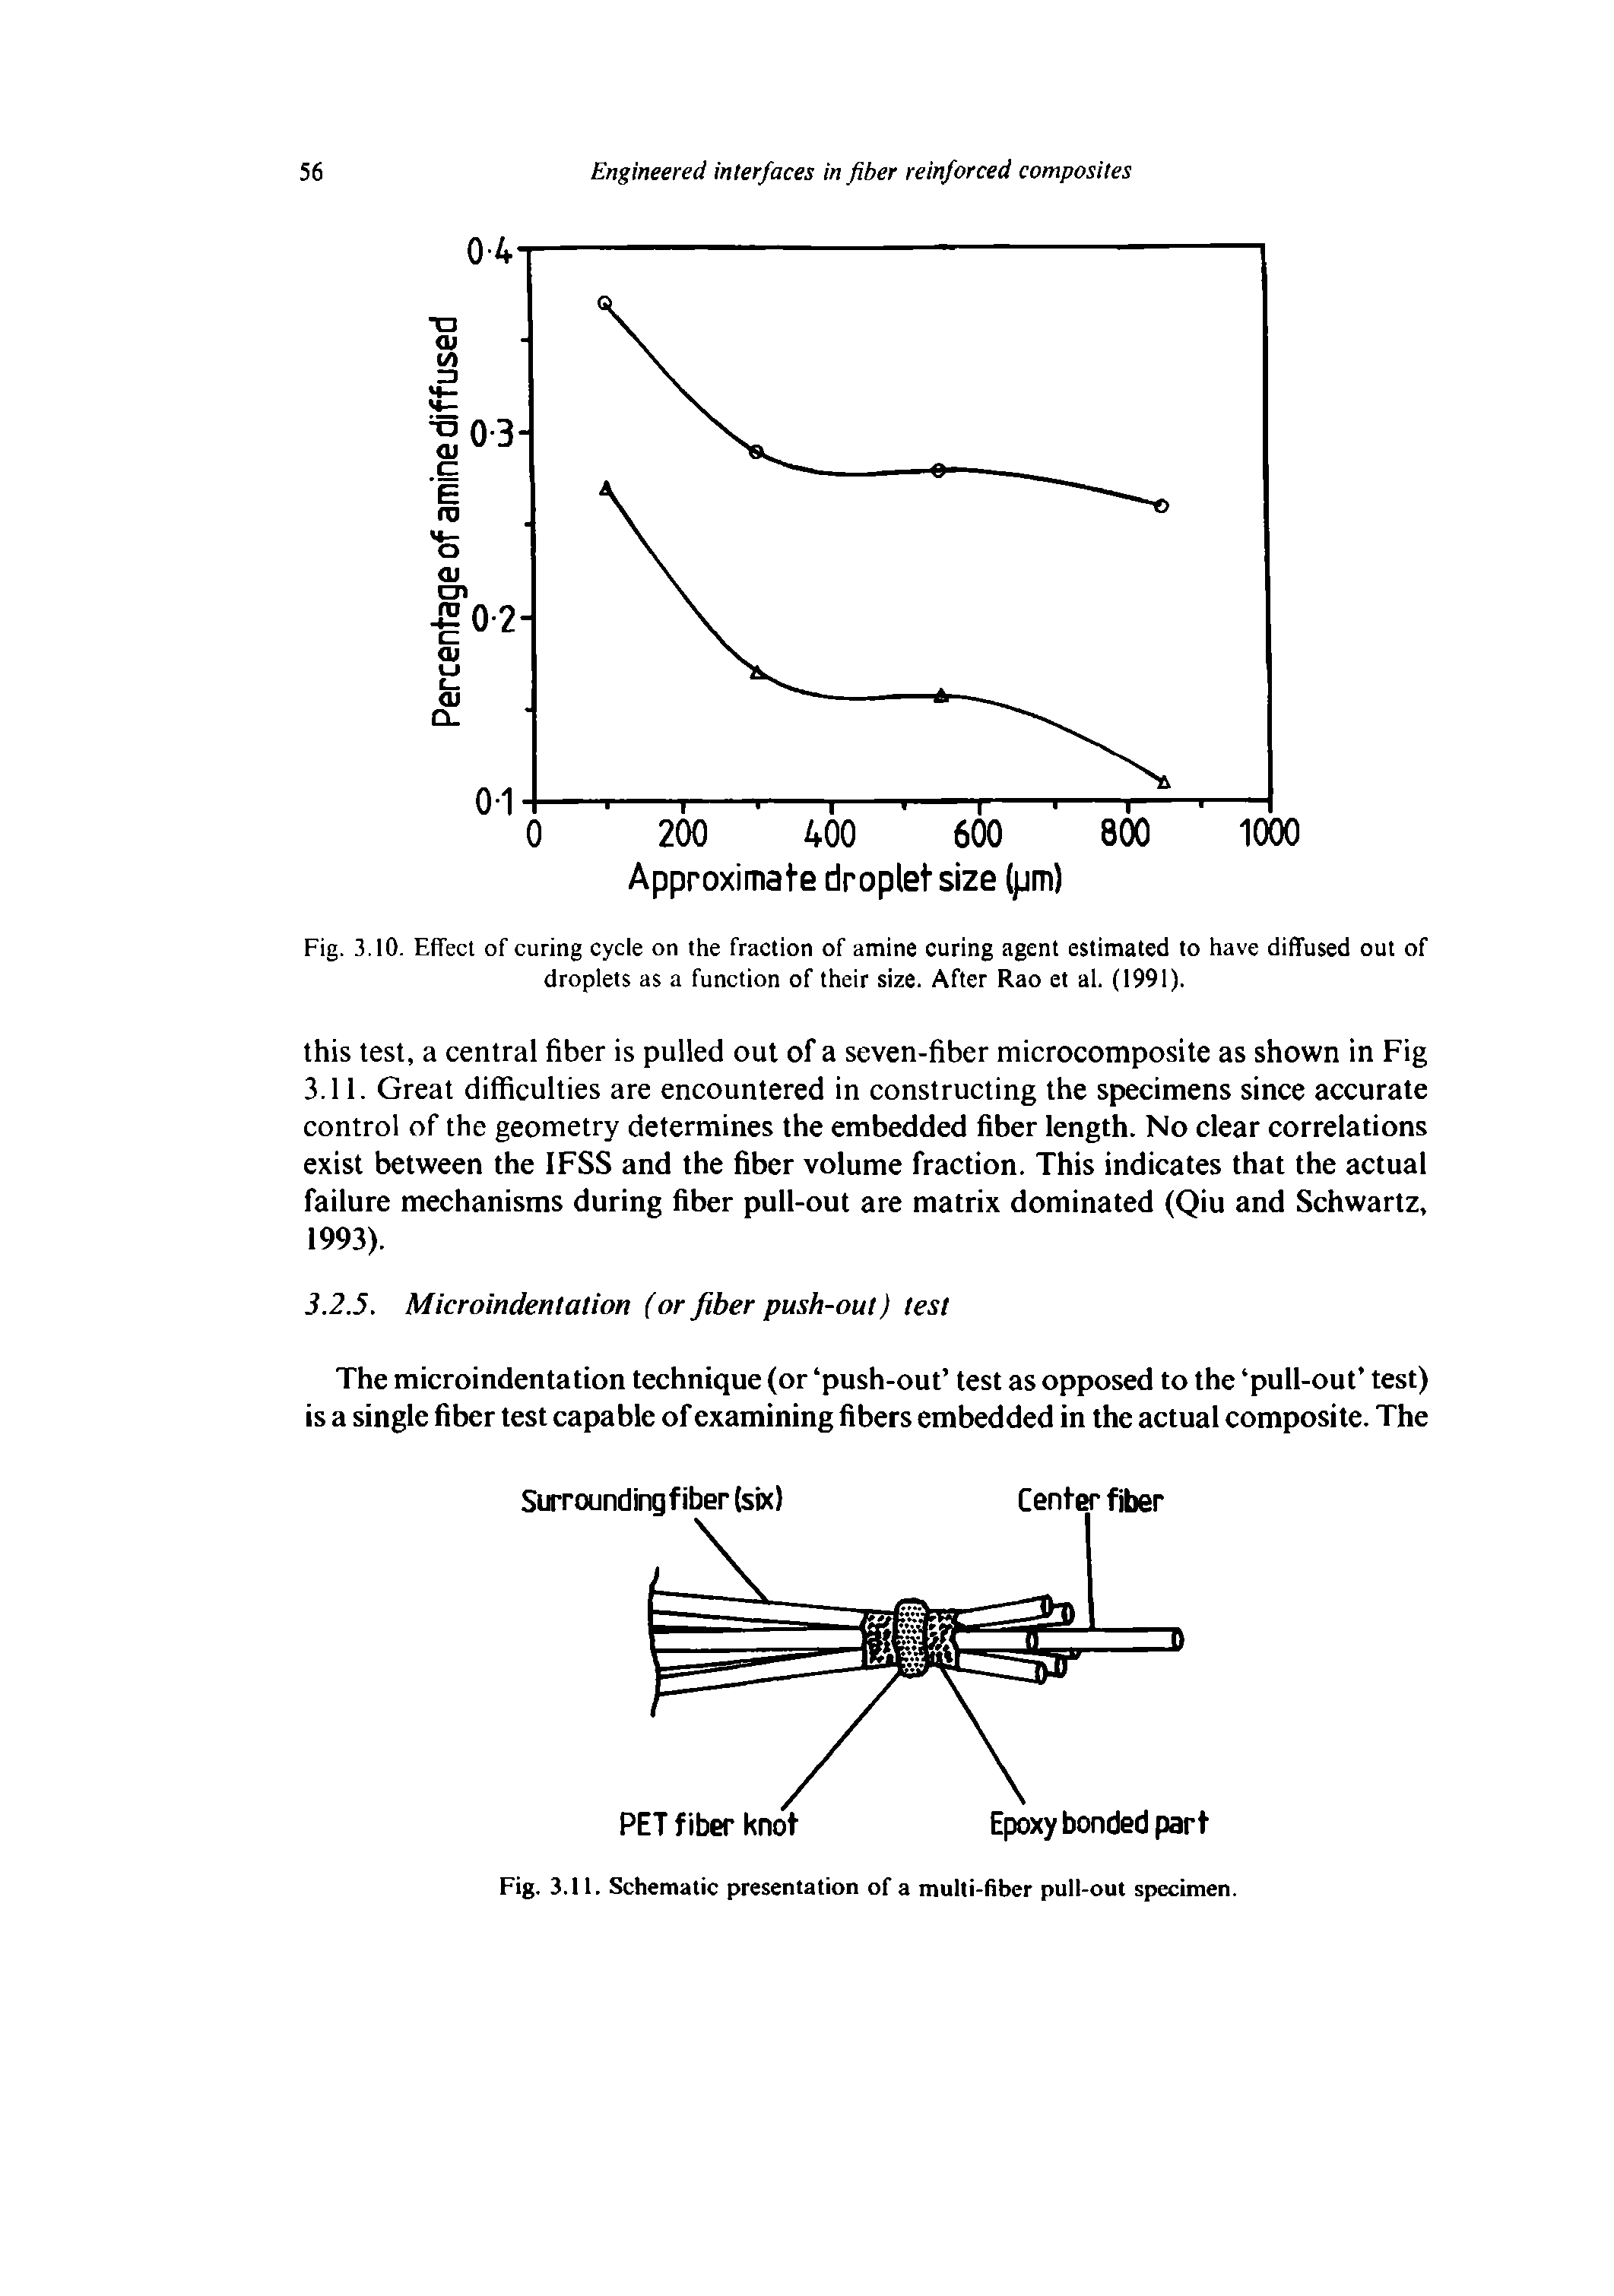 Fig. 3.10. Effect of curing cycle on the fraction of amine curing agent estimated to have diffused out of droplets as a function of their size. After Rao et al. (1991).